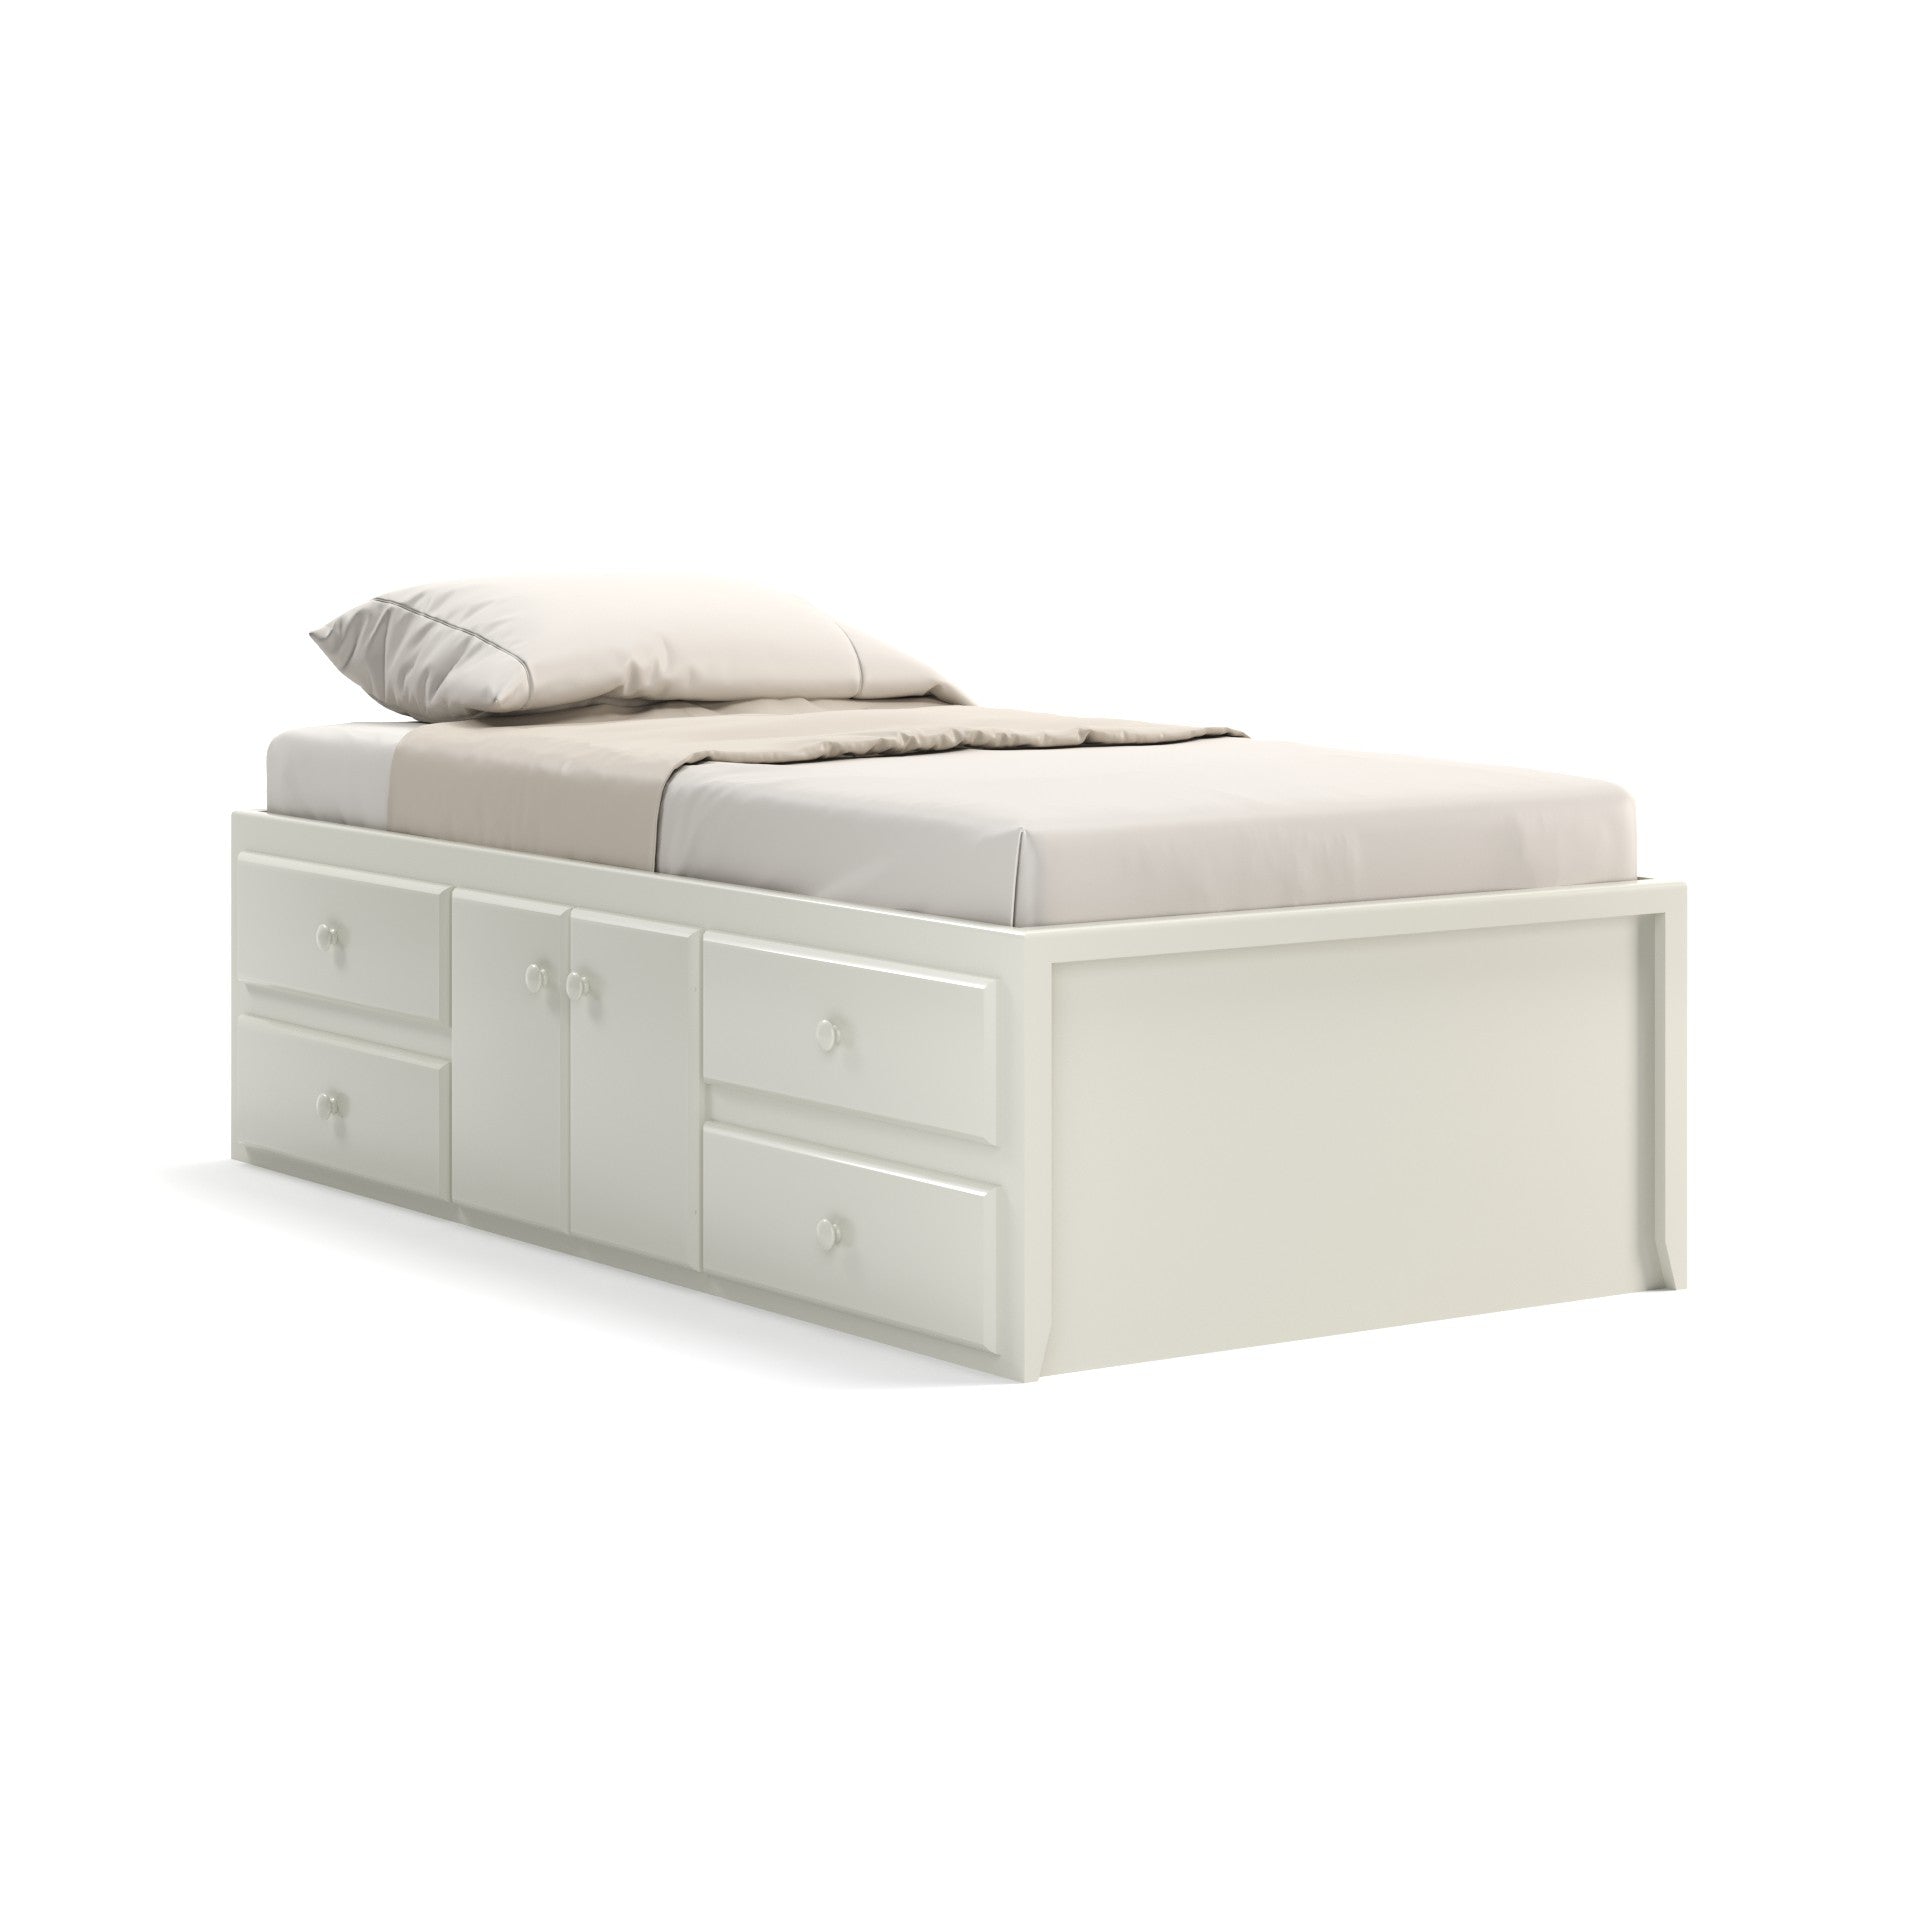 Acadia Shaker Storage Bed with Four Drawers and Two Doors. Featuring four storag drawers and two doors on one side for additional storage. Pictured in White.